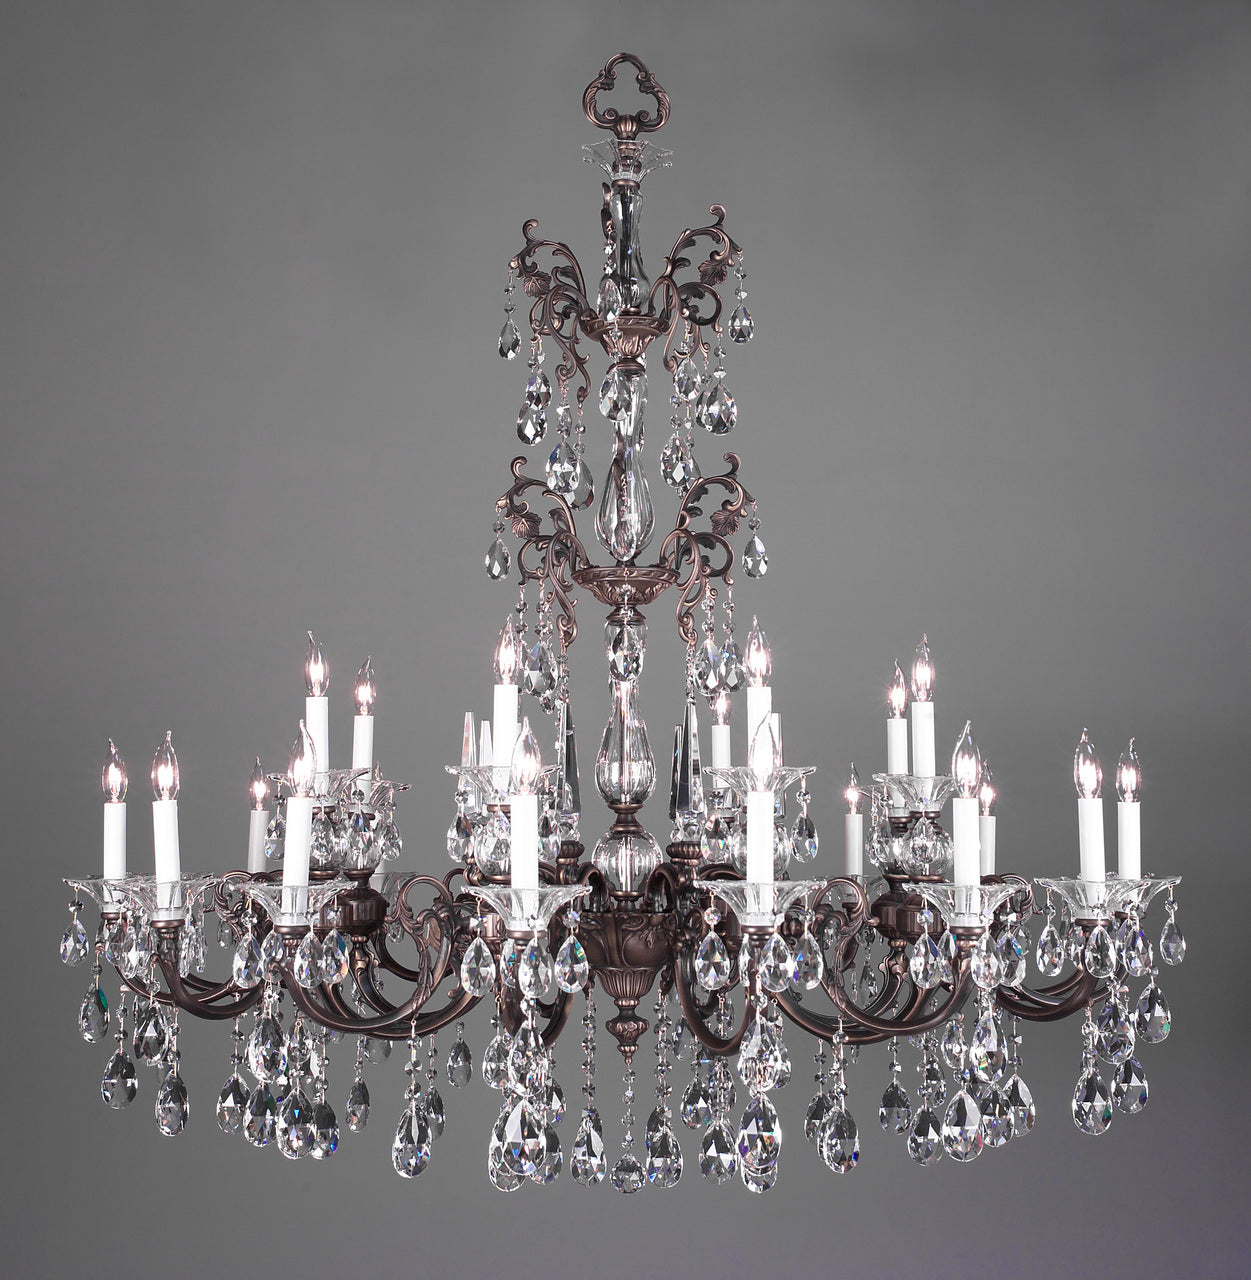 Classic Lighting 57065 SS CP Via Lombardi Crystal Chandelier in Silverstone (Imported from Spain)